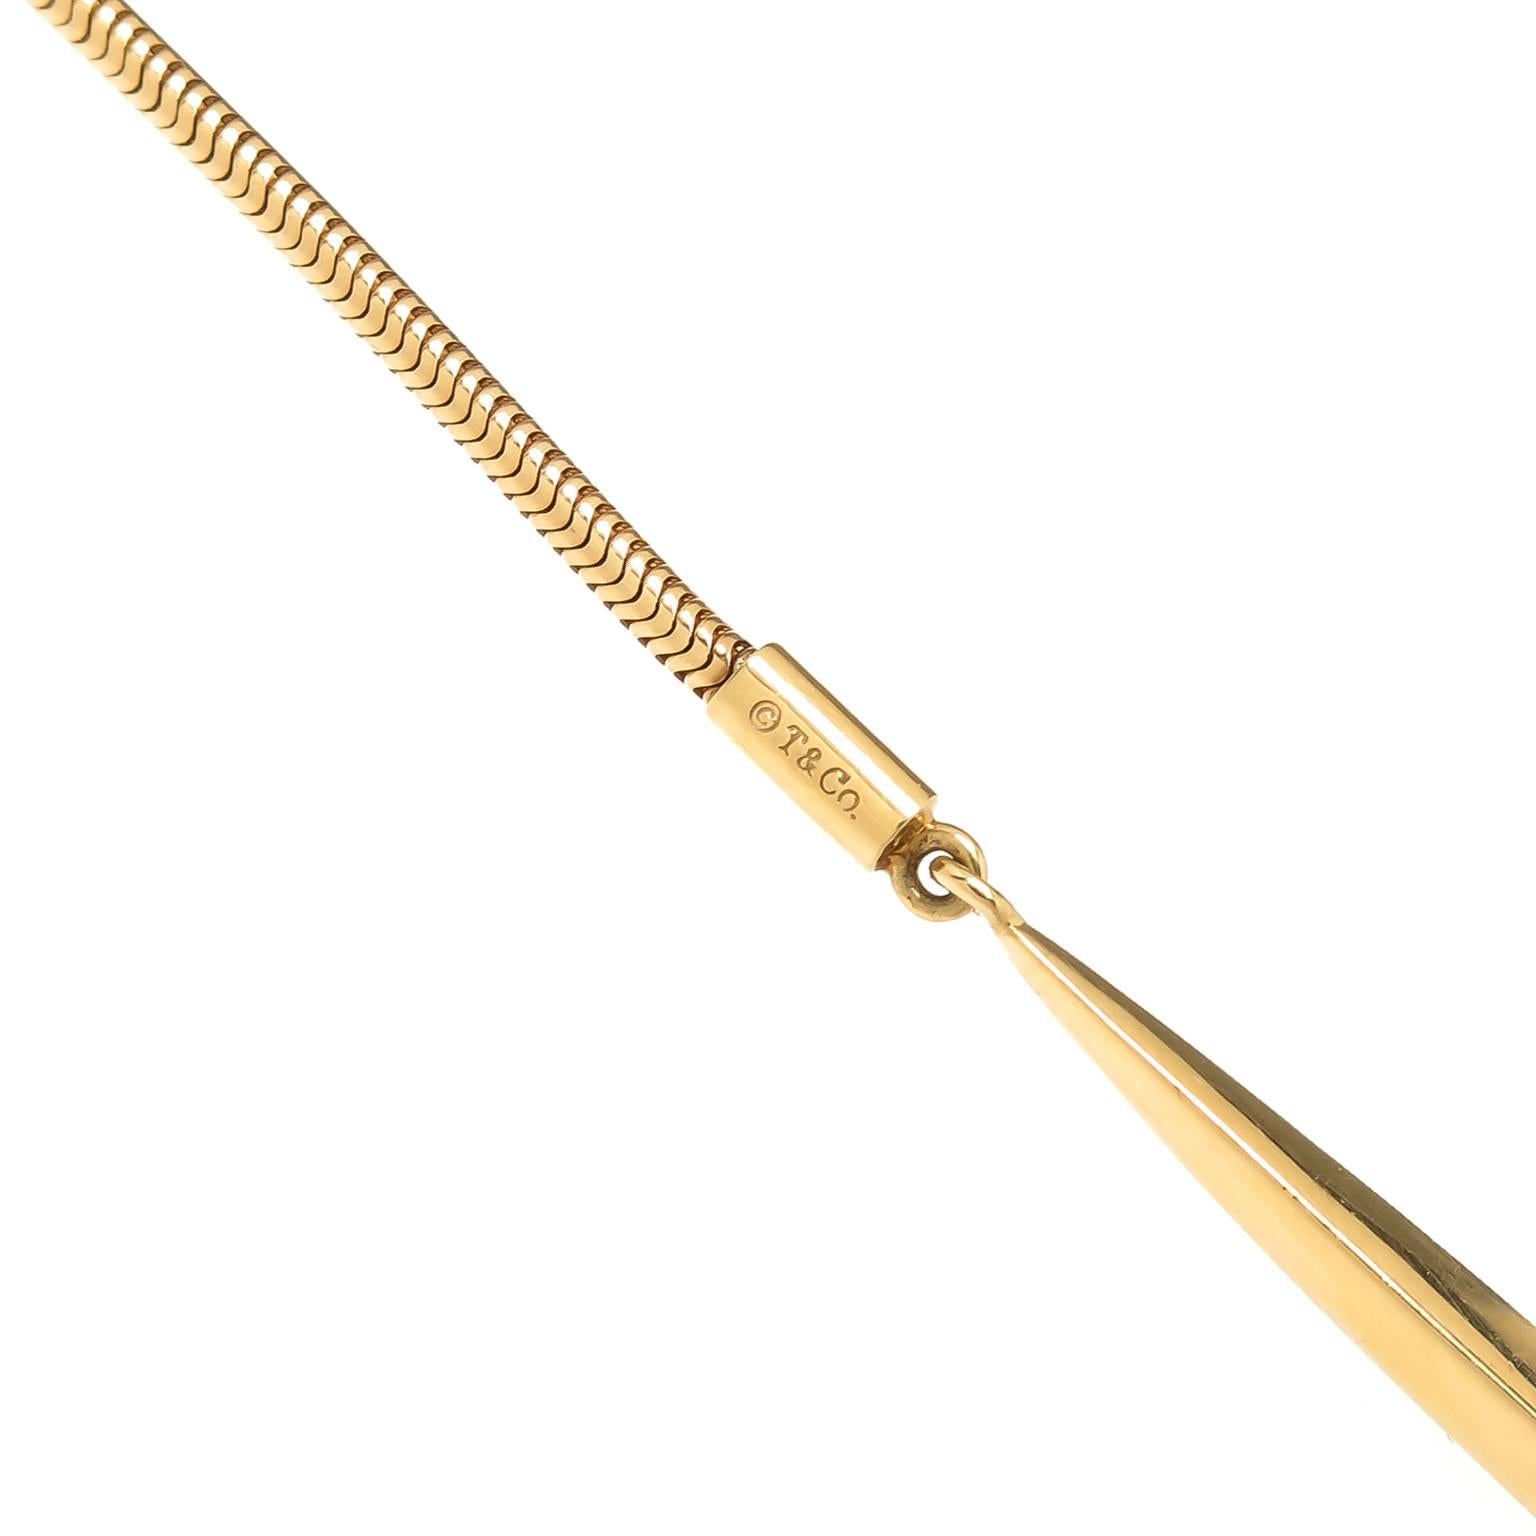 Circa 2000 Tiffany & Co. 18k yellow Gold Lariat Necklace, measuring 26 inch in length and made up of a very soft 1.6 MM thick snake style chain with suspended solid spear shape bottoms. 